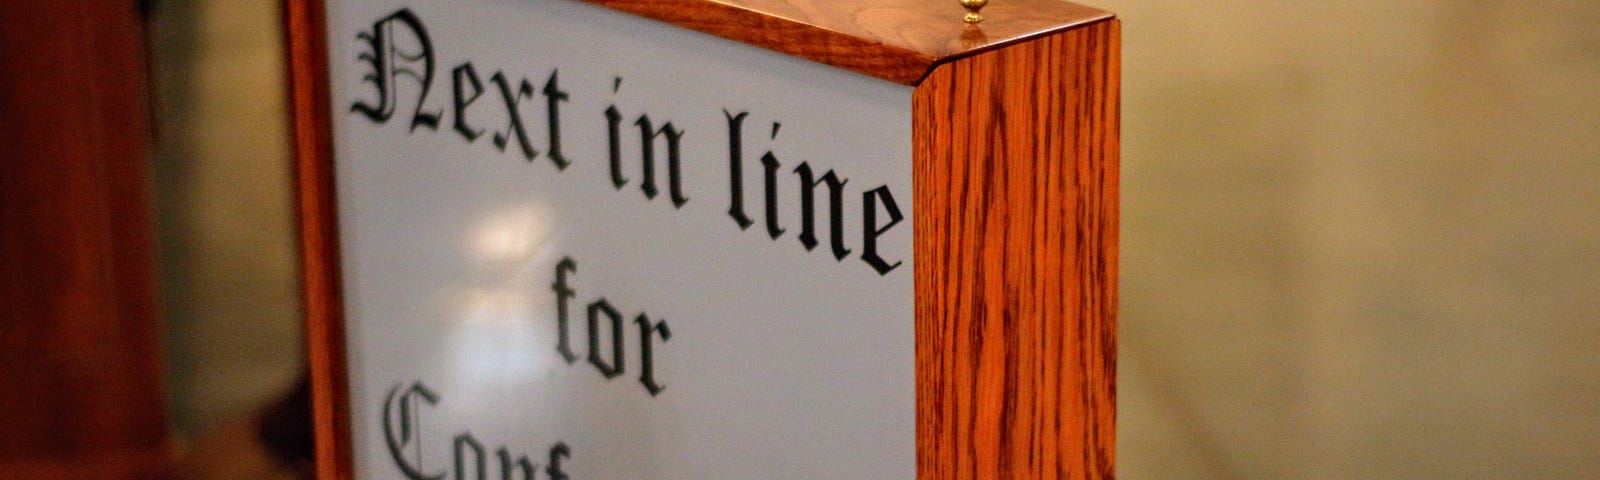 A white sign with a wooden border and antique lettering that reads, “Next in line for Confession”